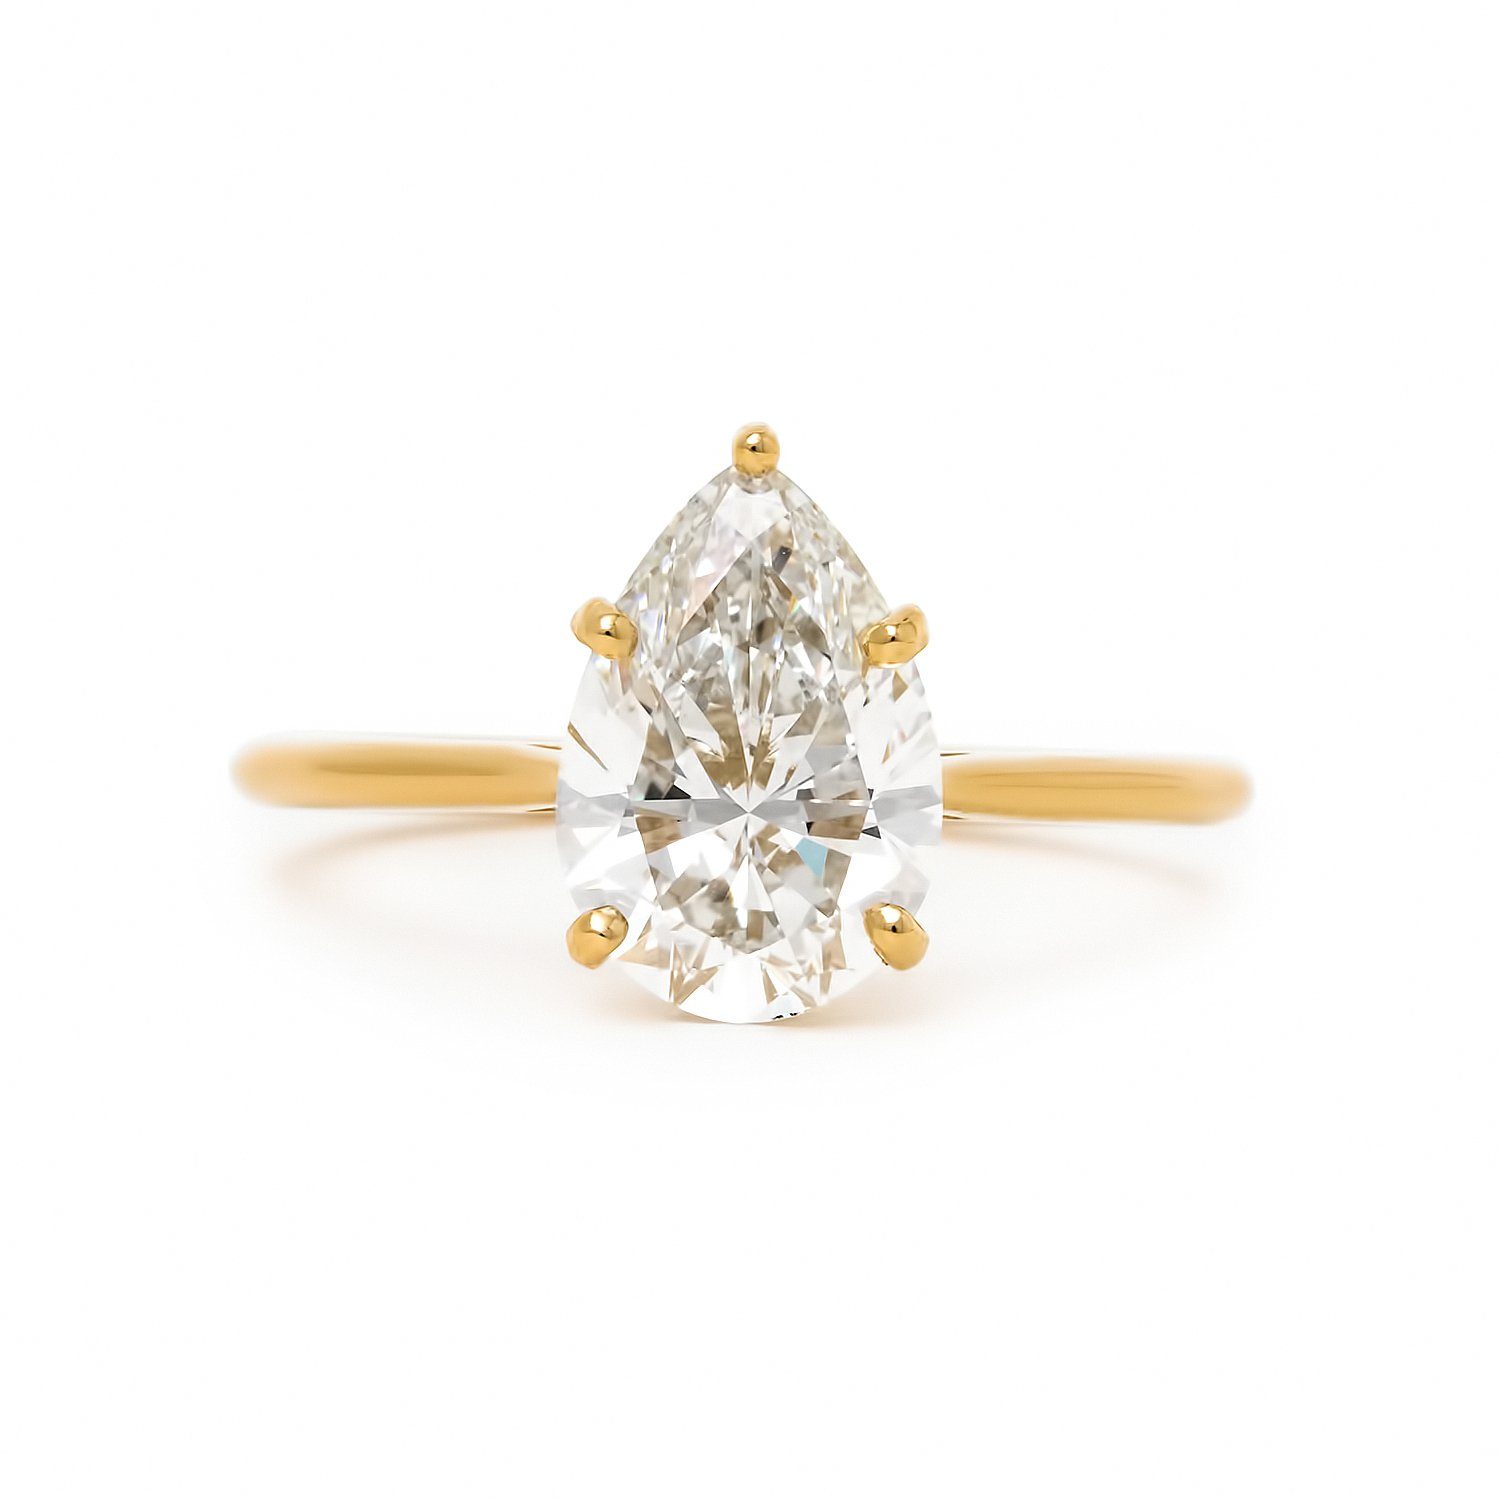 Pear diamond solitaire engagement ring